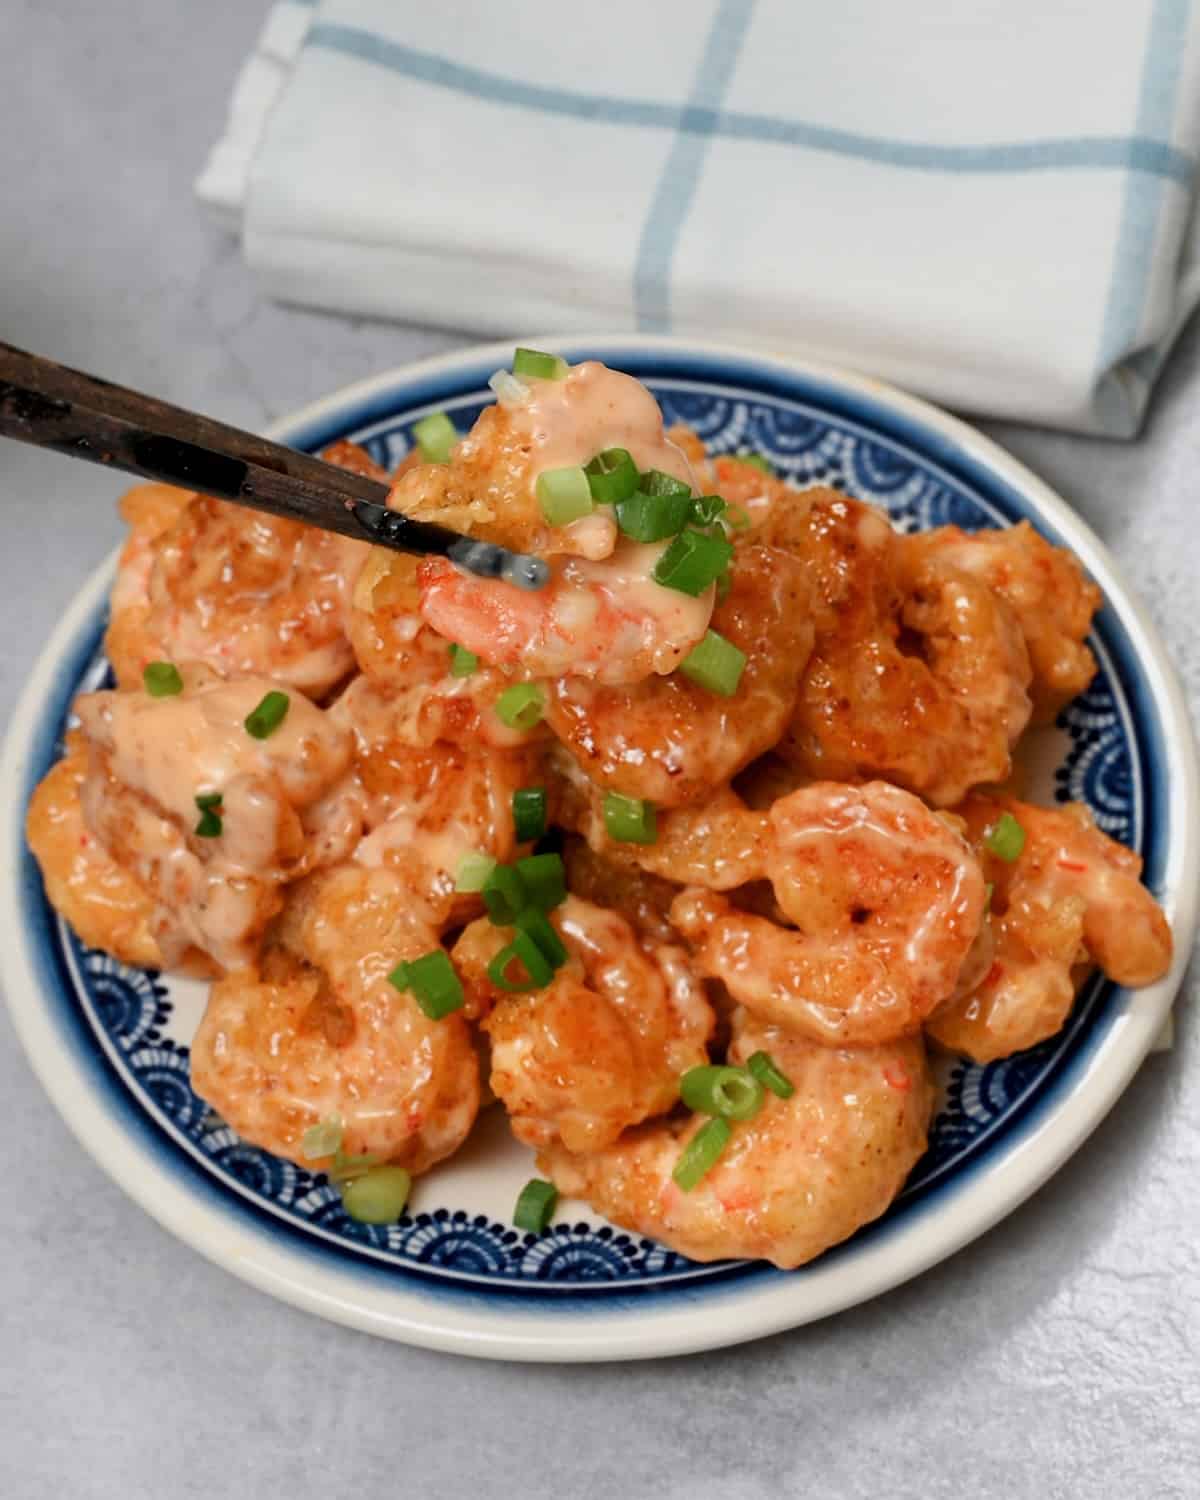 A serving of shrimp cooked in the bang bang style